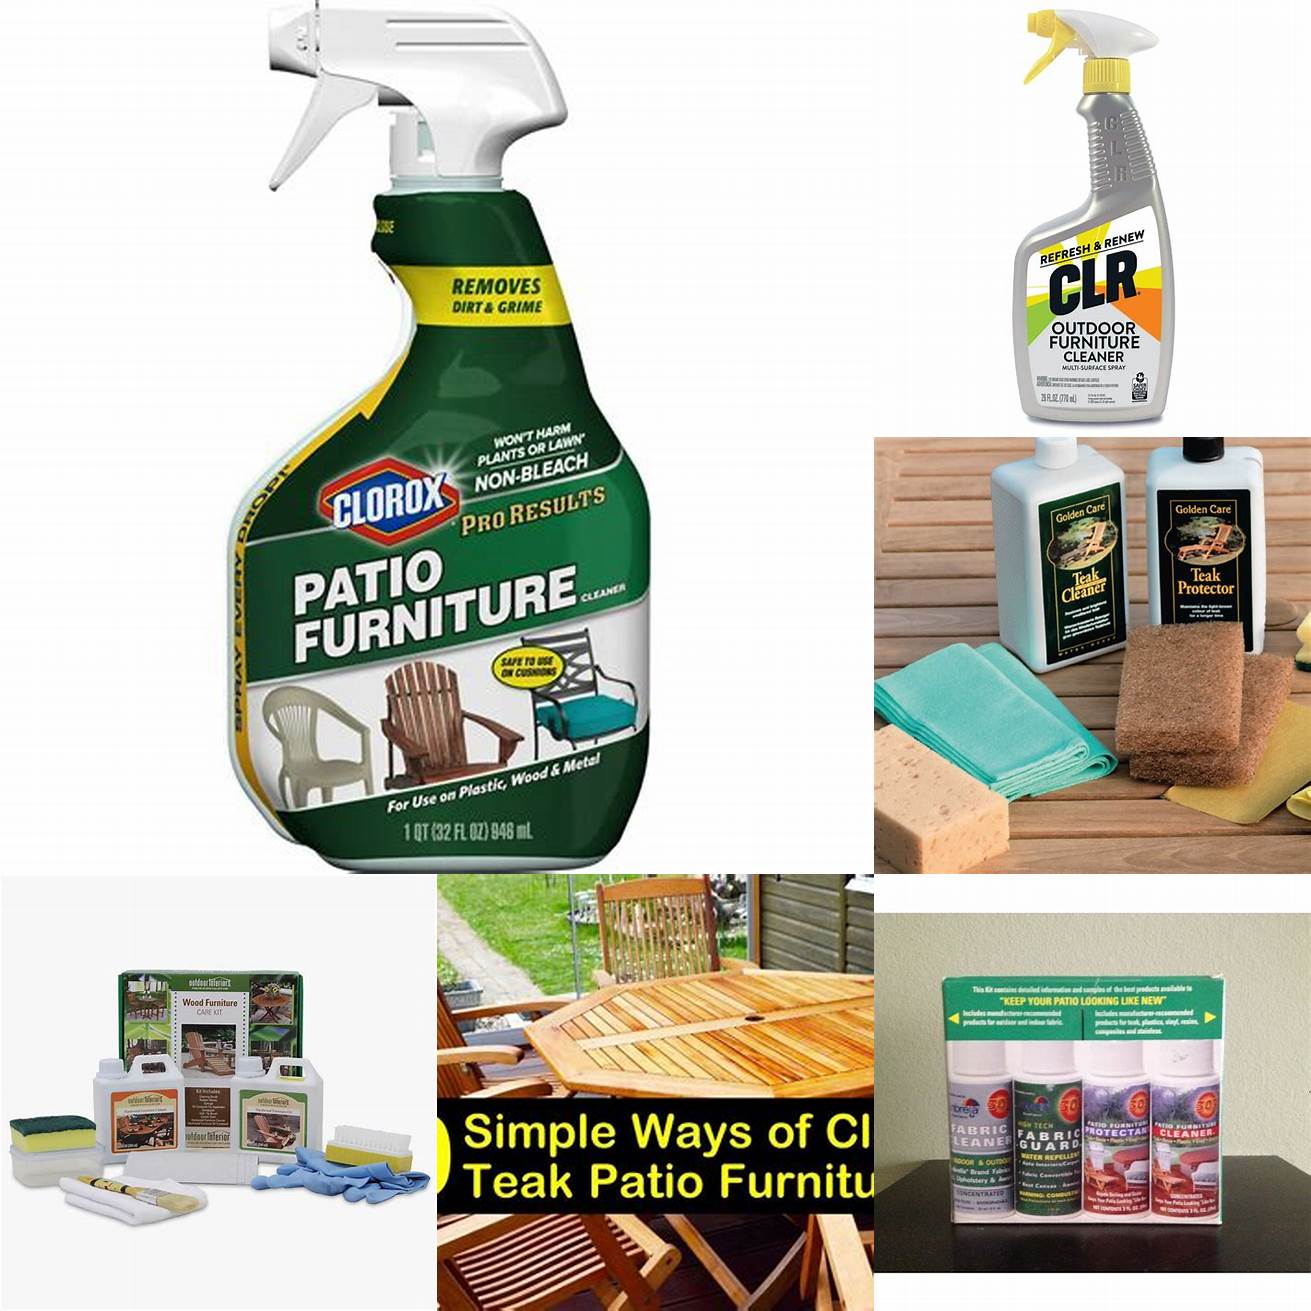 Examples of outdoor furniture maintenance products